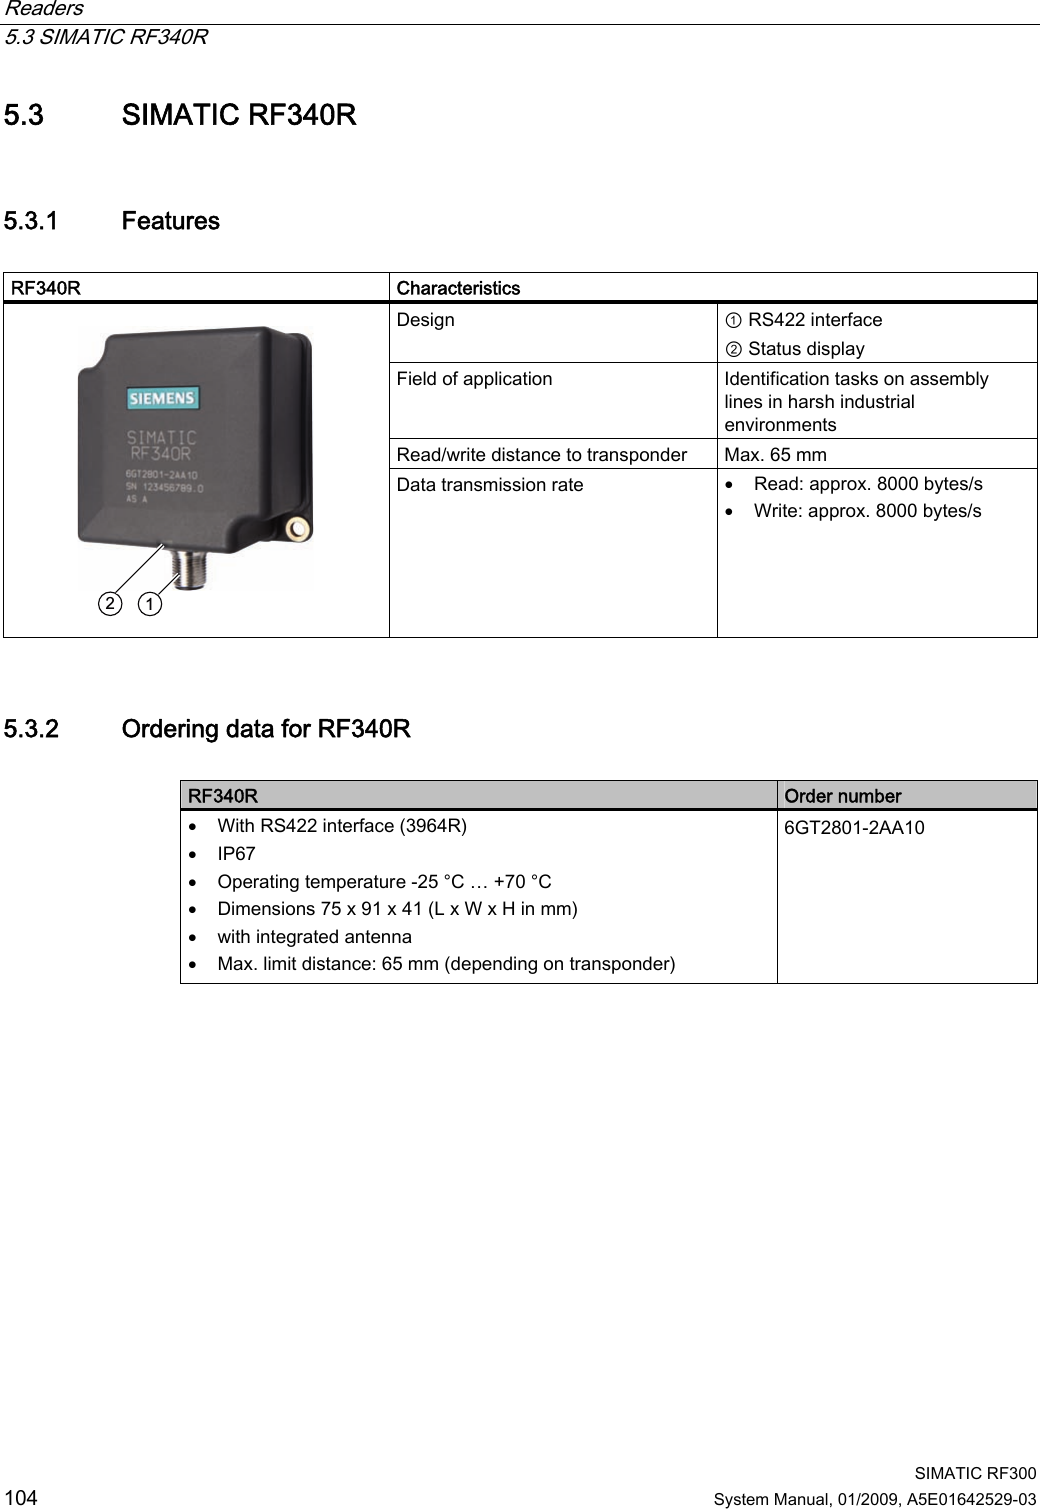 Readers   5.3 SIMATIC RF340R  SIMATIC RF300 104 System Manual, 01/2009, A5E01642529-03 5.3 SIMATIC RF340R 5.3.1 Features  RF340R     Characteristics Design  ① RS422 interface ② Status display Field of application  Identification tasks on assembly lines in harsh industrial environments Read/write distance to transponder  Max. 65 mm     Data transmission rate  • Read: approx. 8000 bytes/s • Write: approx. 8000 bytes/s 5.3.2 Ordering data for RF340R  RF340R  Order number • With RS422 interface (3964R) • IP67 • Operating temperature -25 °C … +70 °C • Dimensions 75 x 91 x 41 (L x W x H in mm) • with integrated antenna • Max. limit distance: 65 mm (depending on transponder) 6GT2801-2AA10 